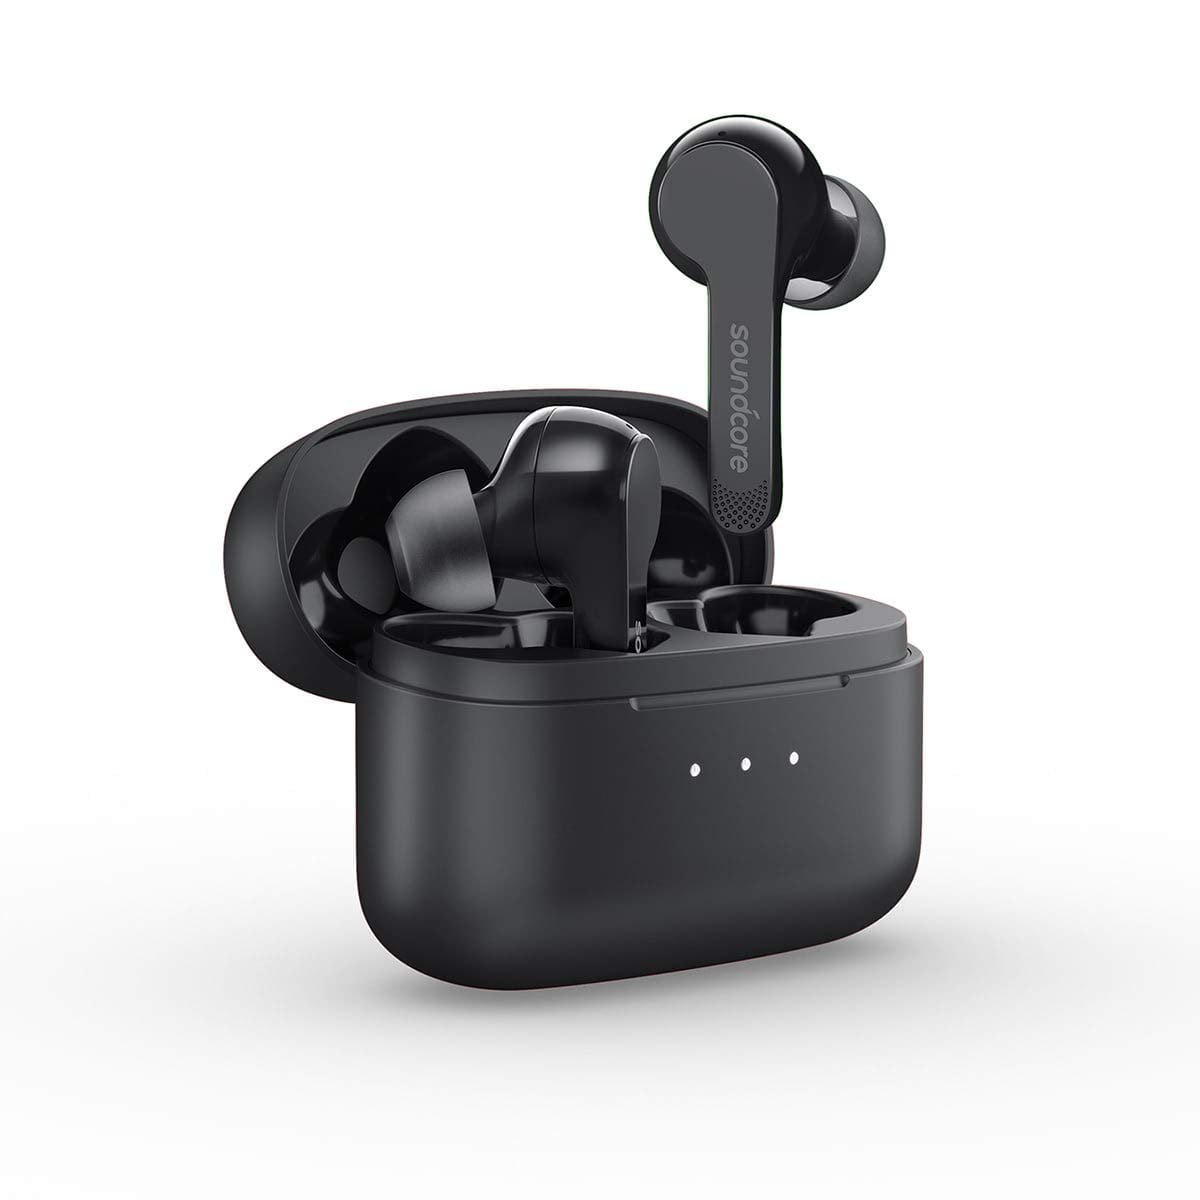 Anker Liberty Air True Wireless Earphones with Charging Case